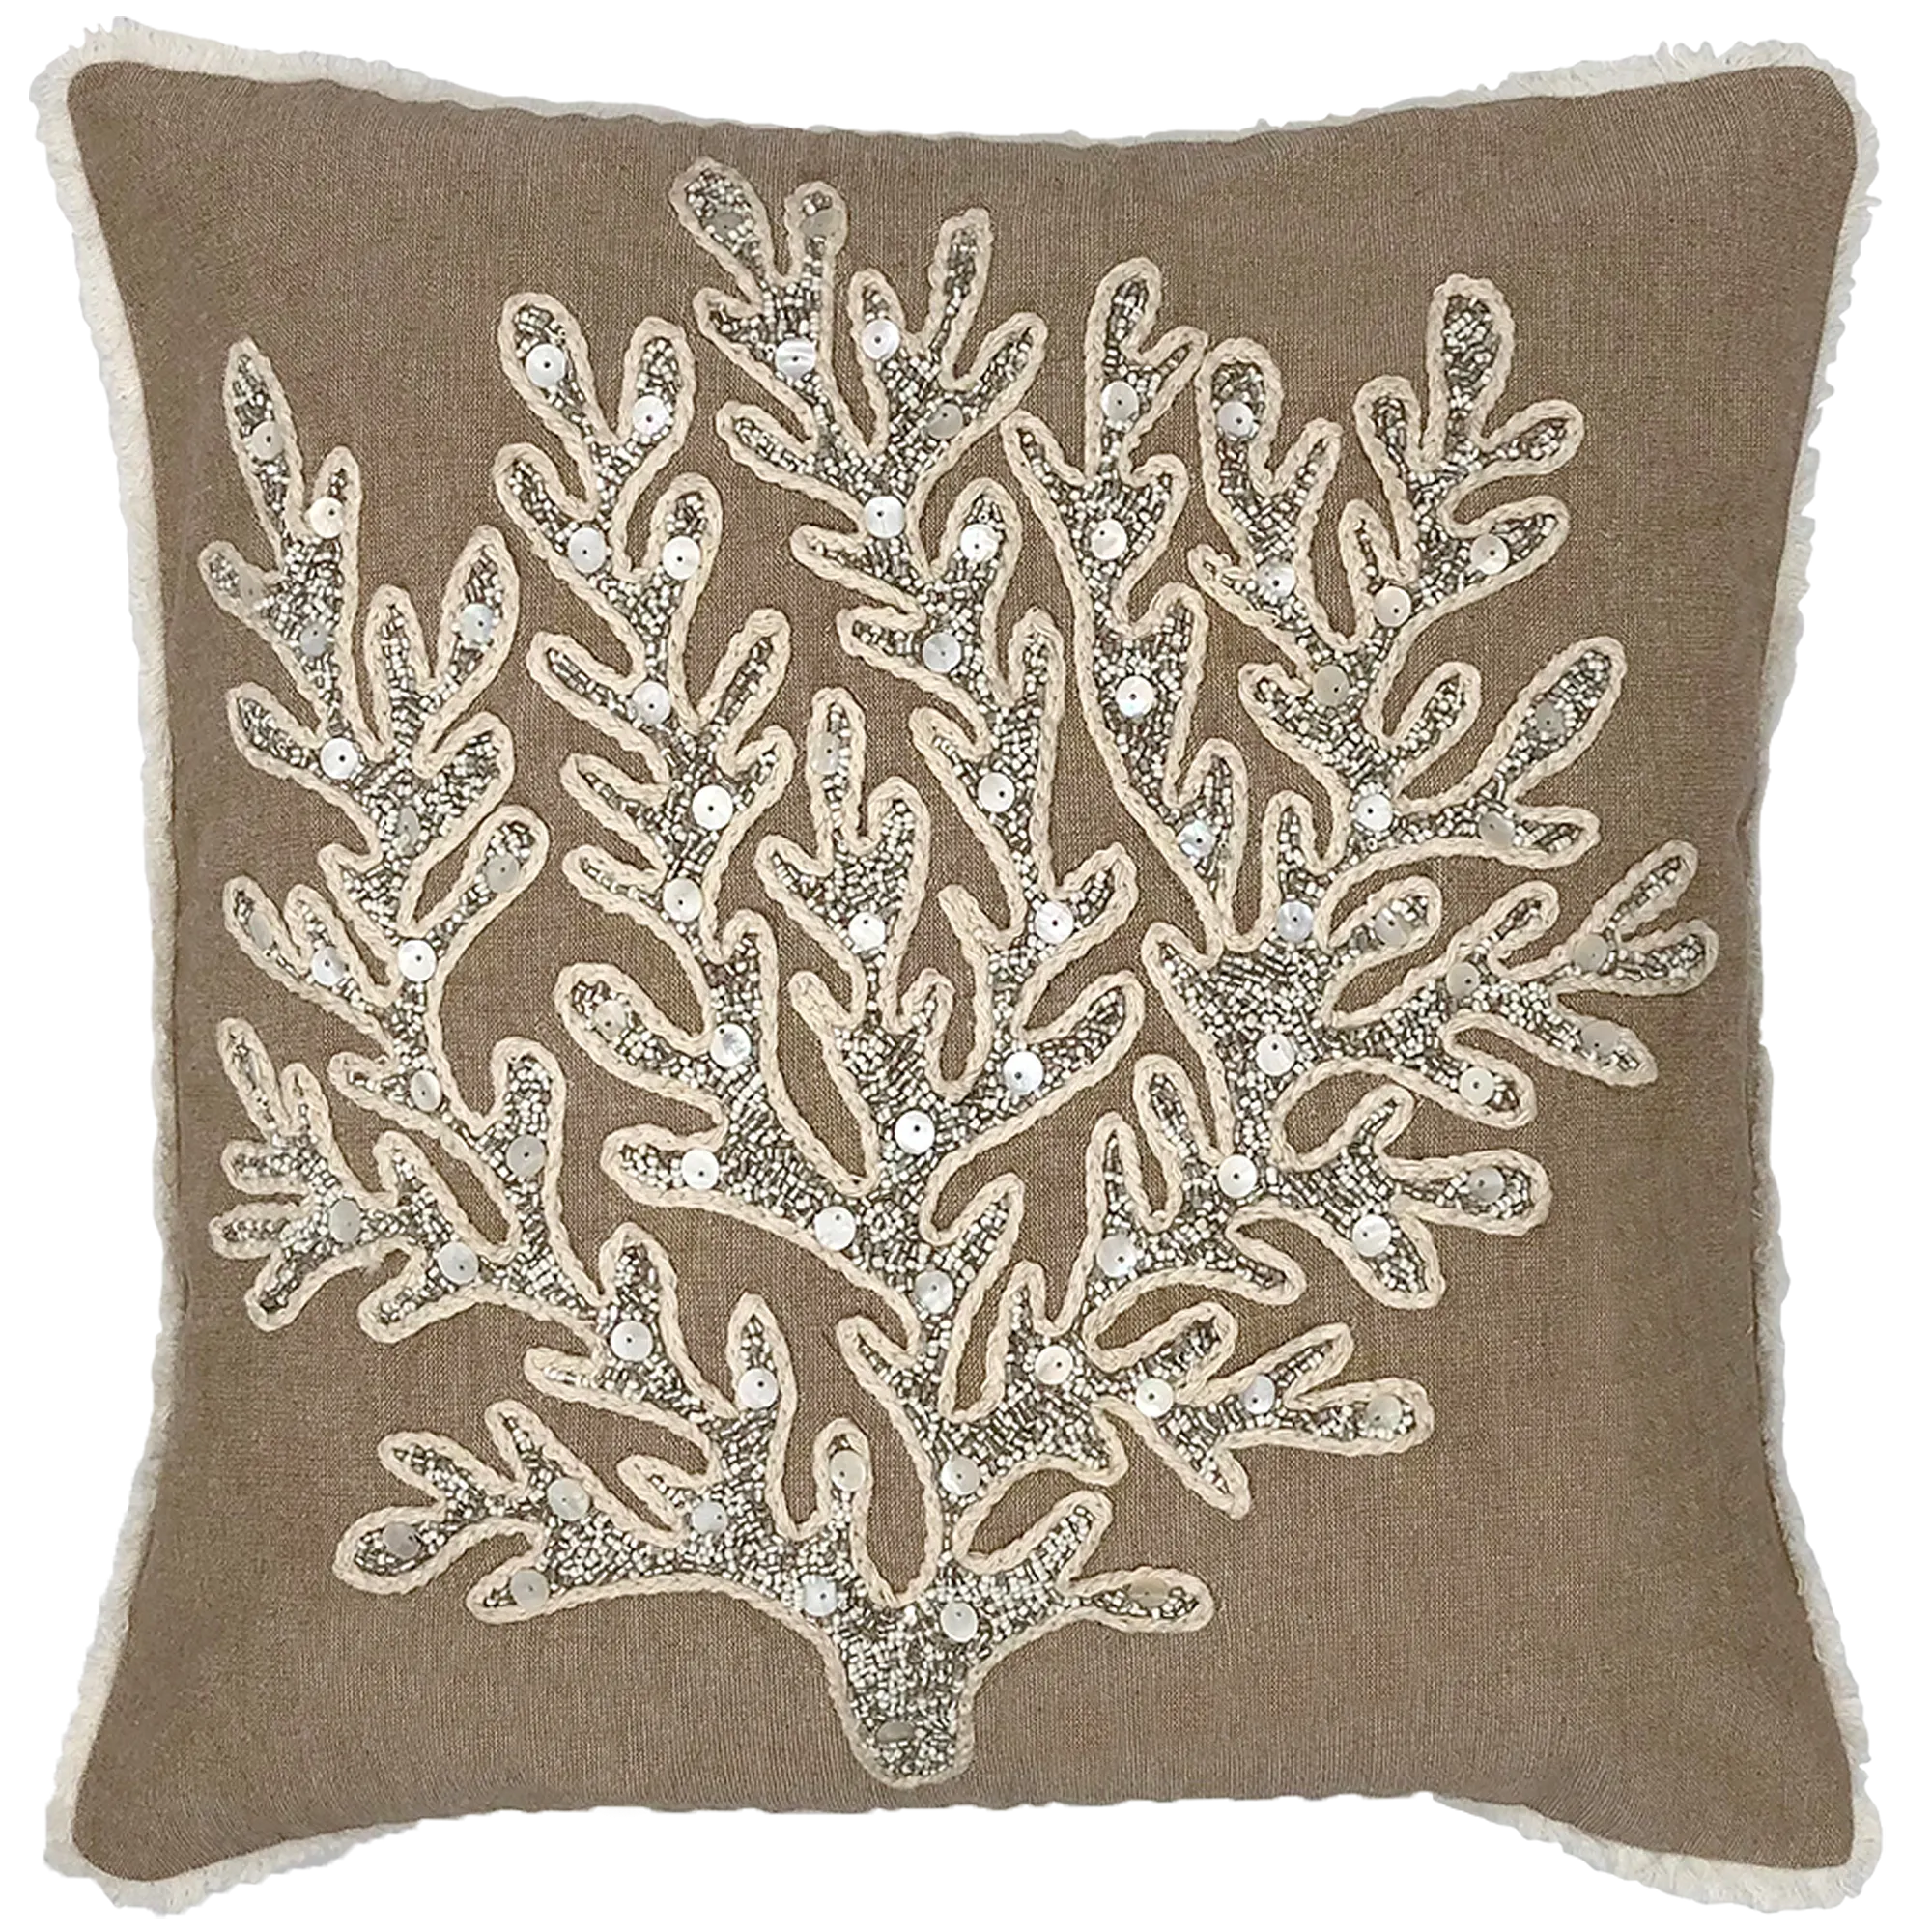 Coral Beads Embroidery Pillow, 18''x18'' home decor - Mod Lifestyles